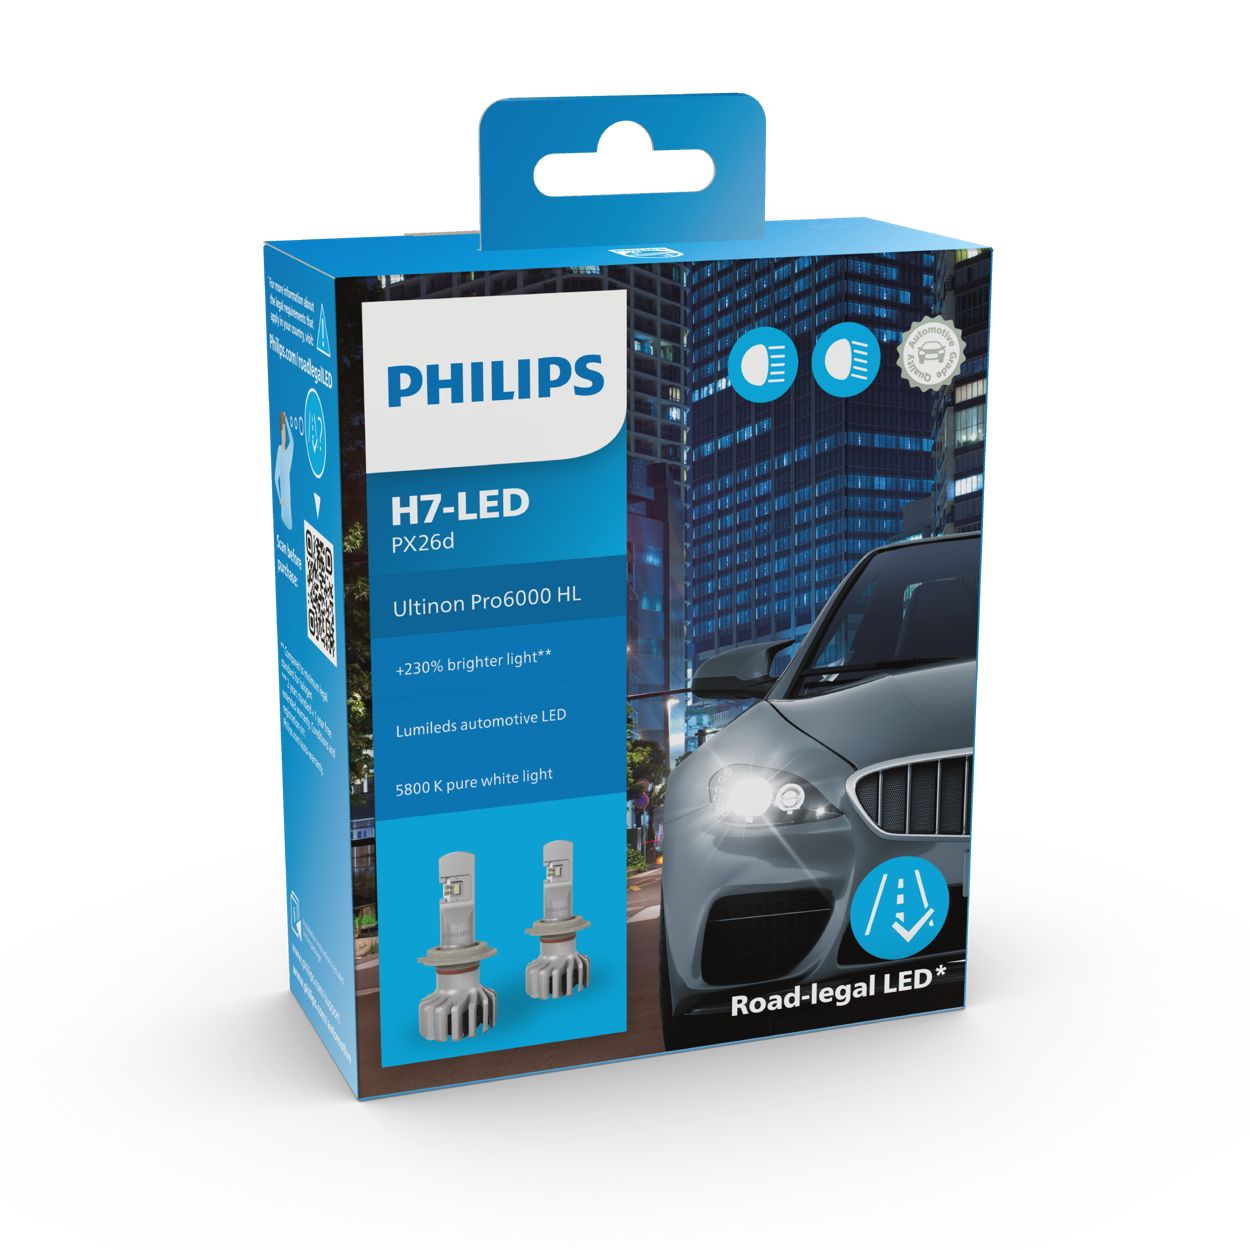 https://images.philips.com/is/image/philipsconsumer/313ee16bfdfa49559b61afac00ccf7ce?$jpglarge$&wid=1250